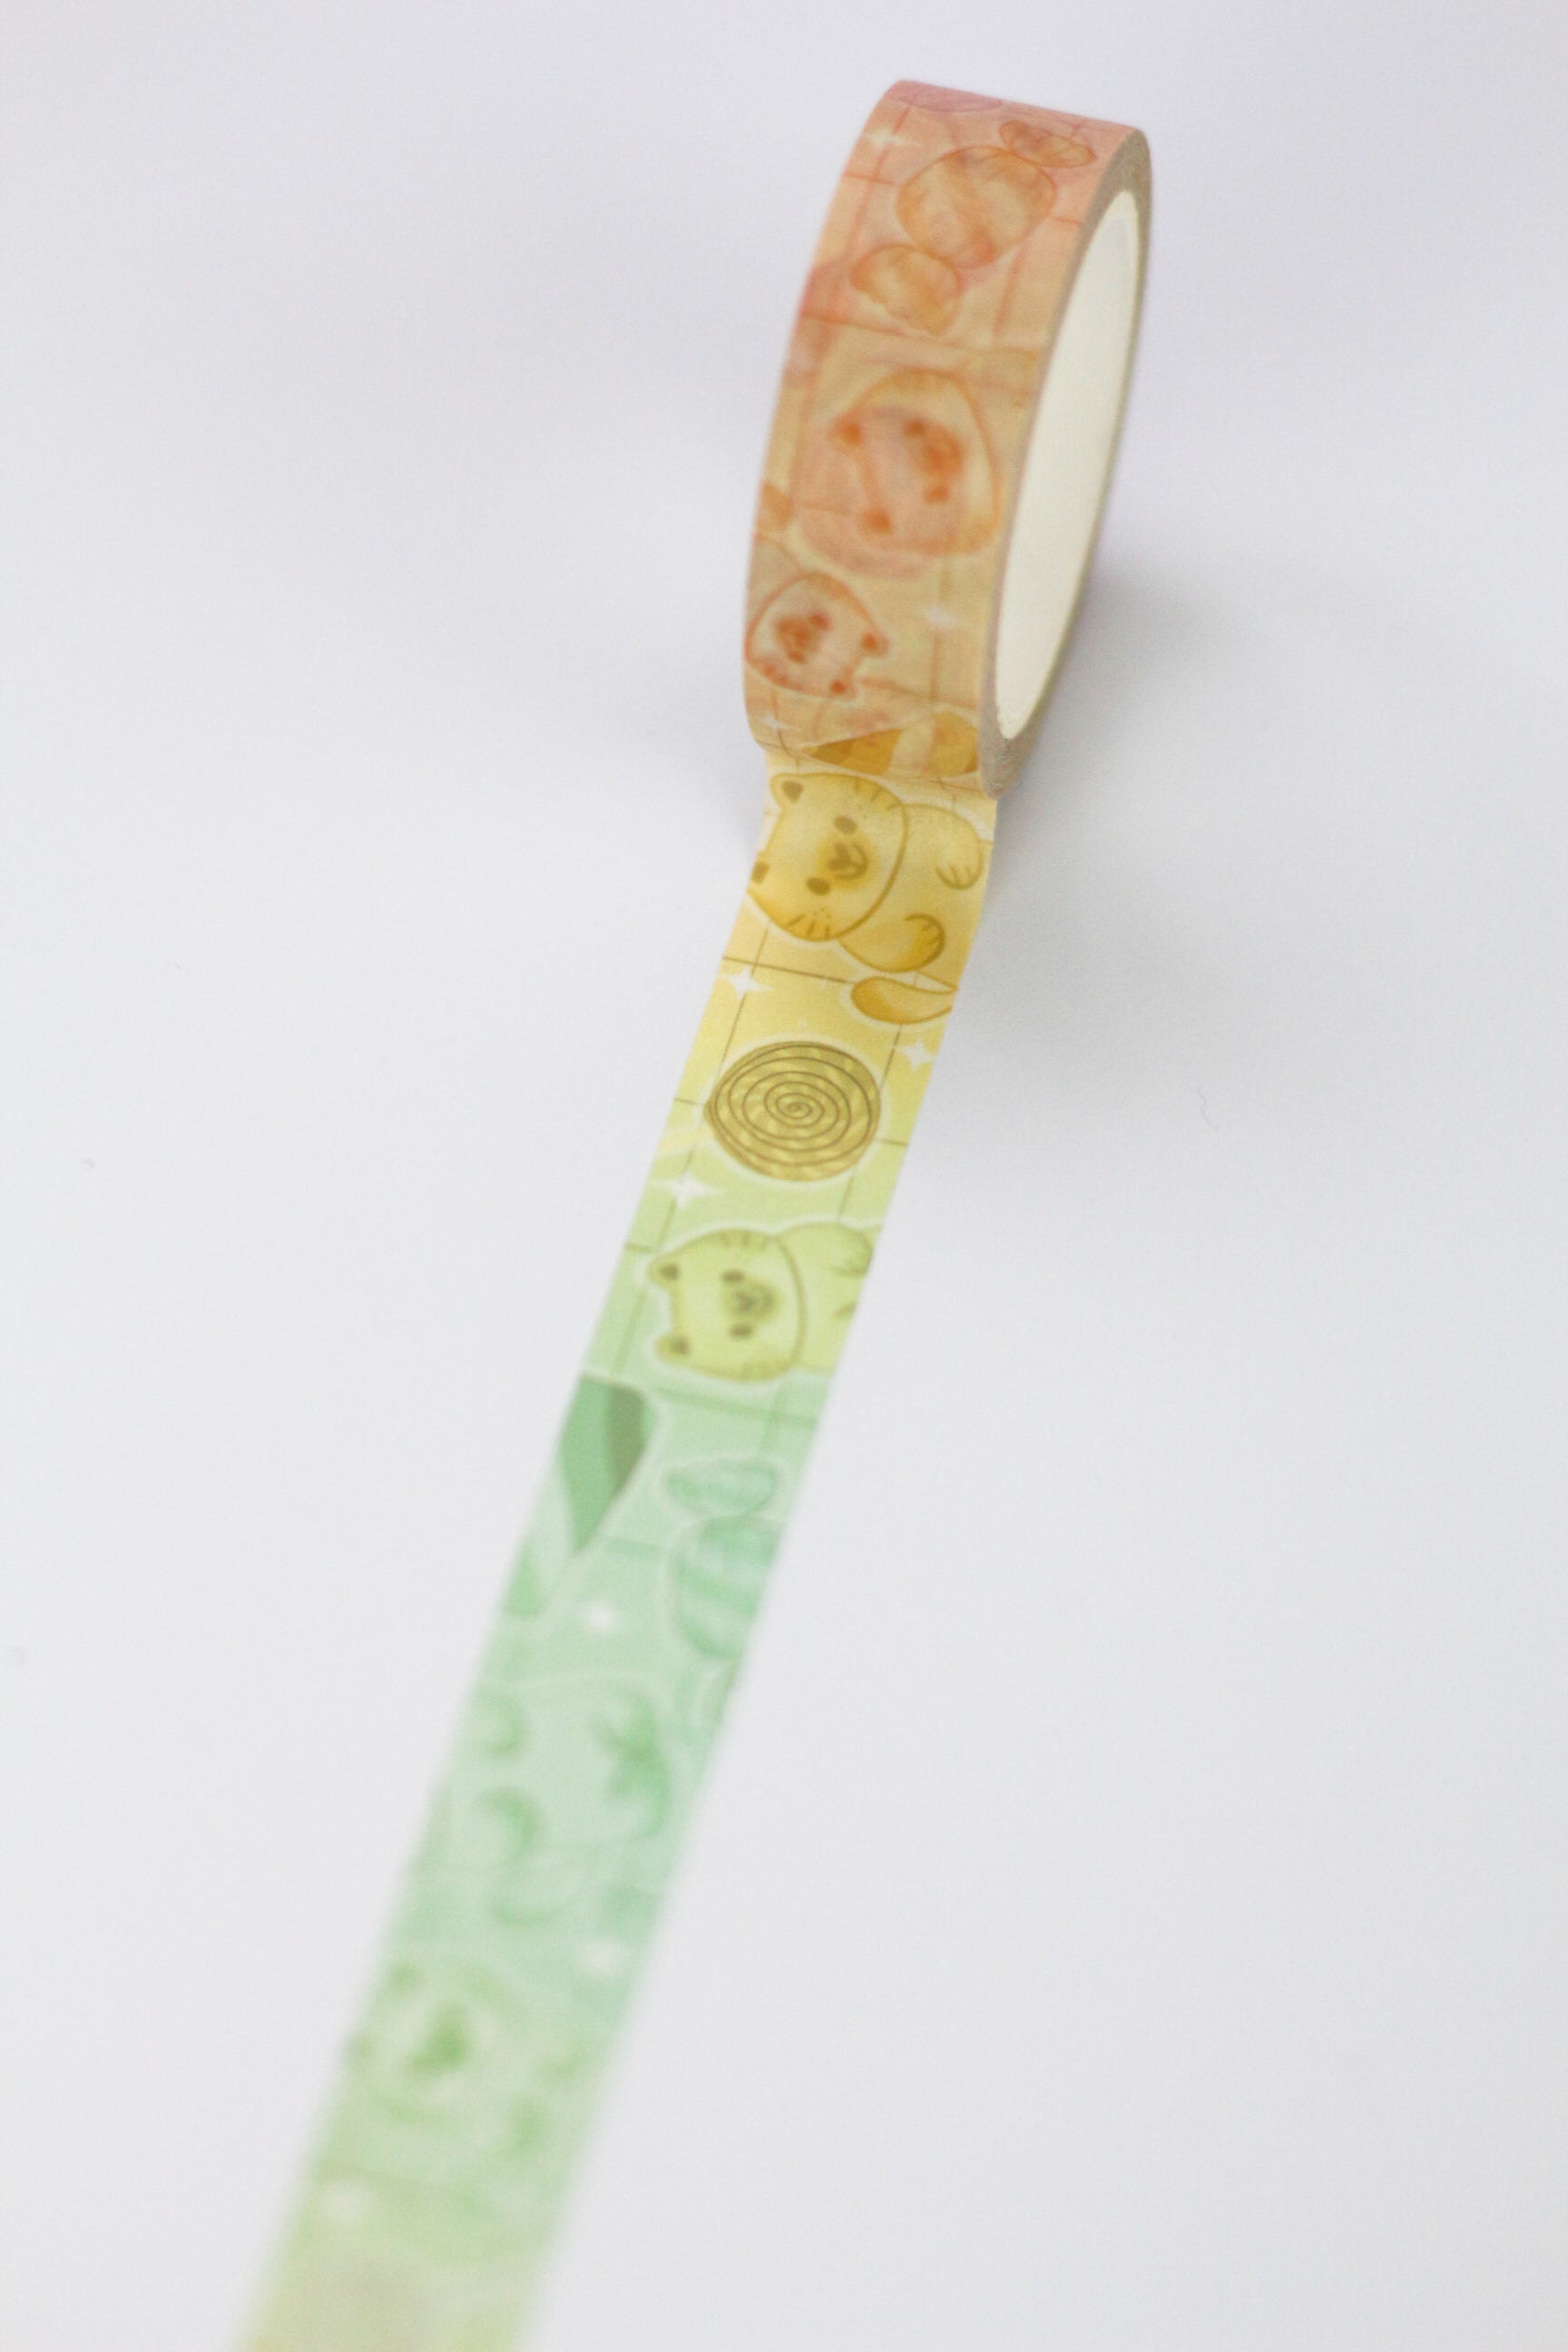 Rainbow Candies - Candy washi tape - Cute washi tape – My Sweet Paper Card